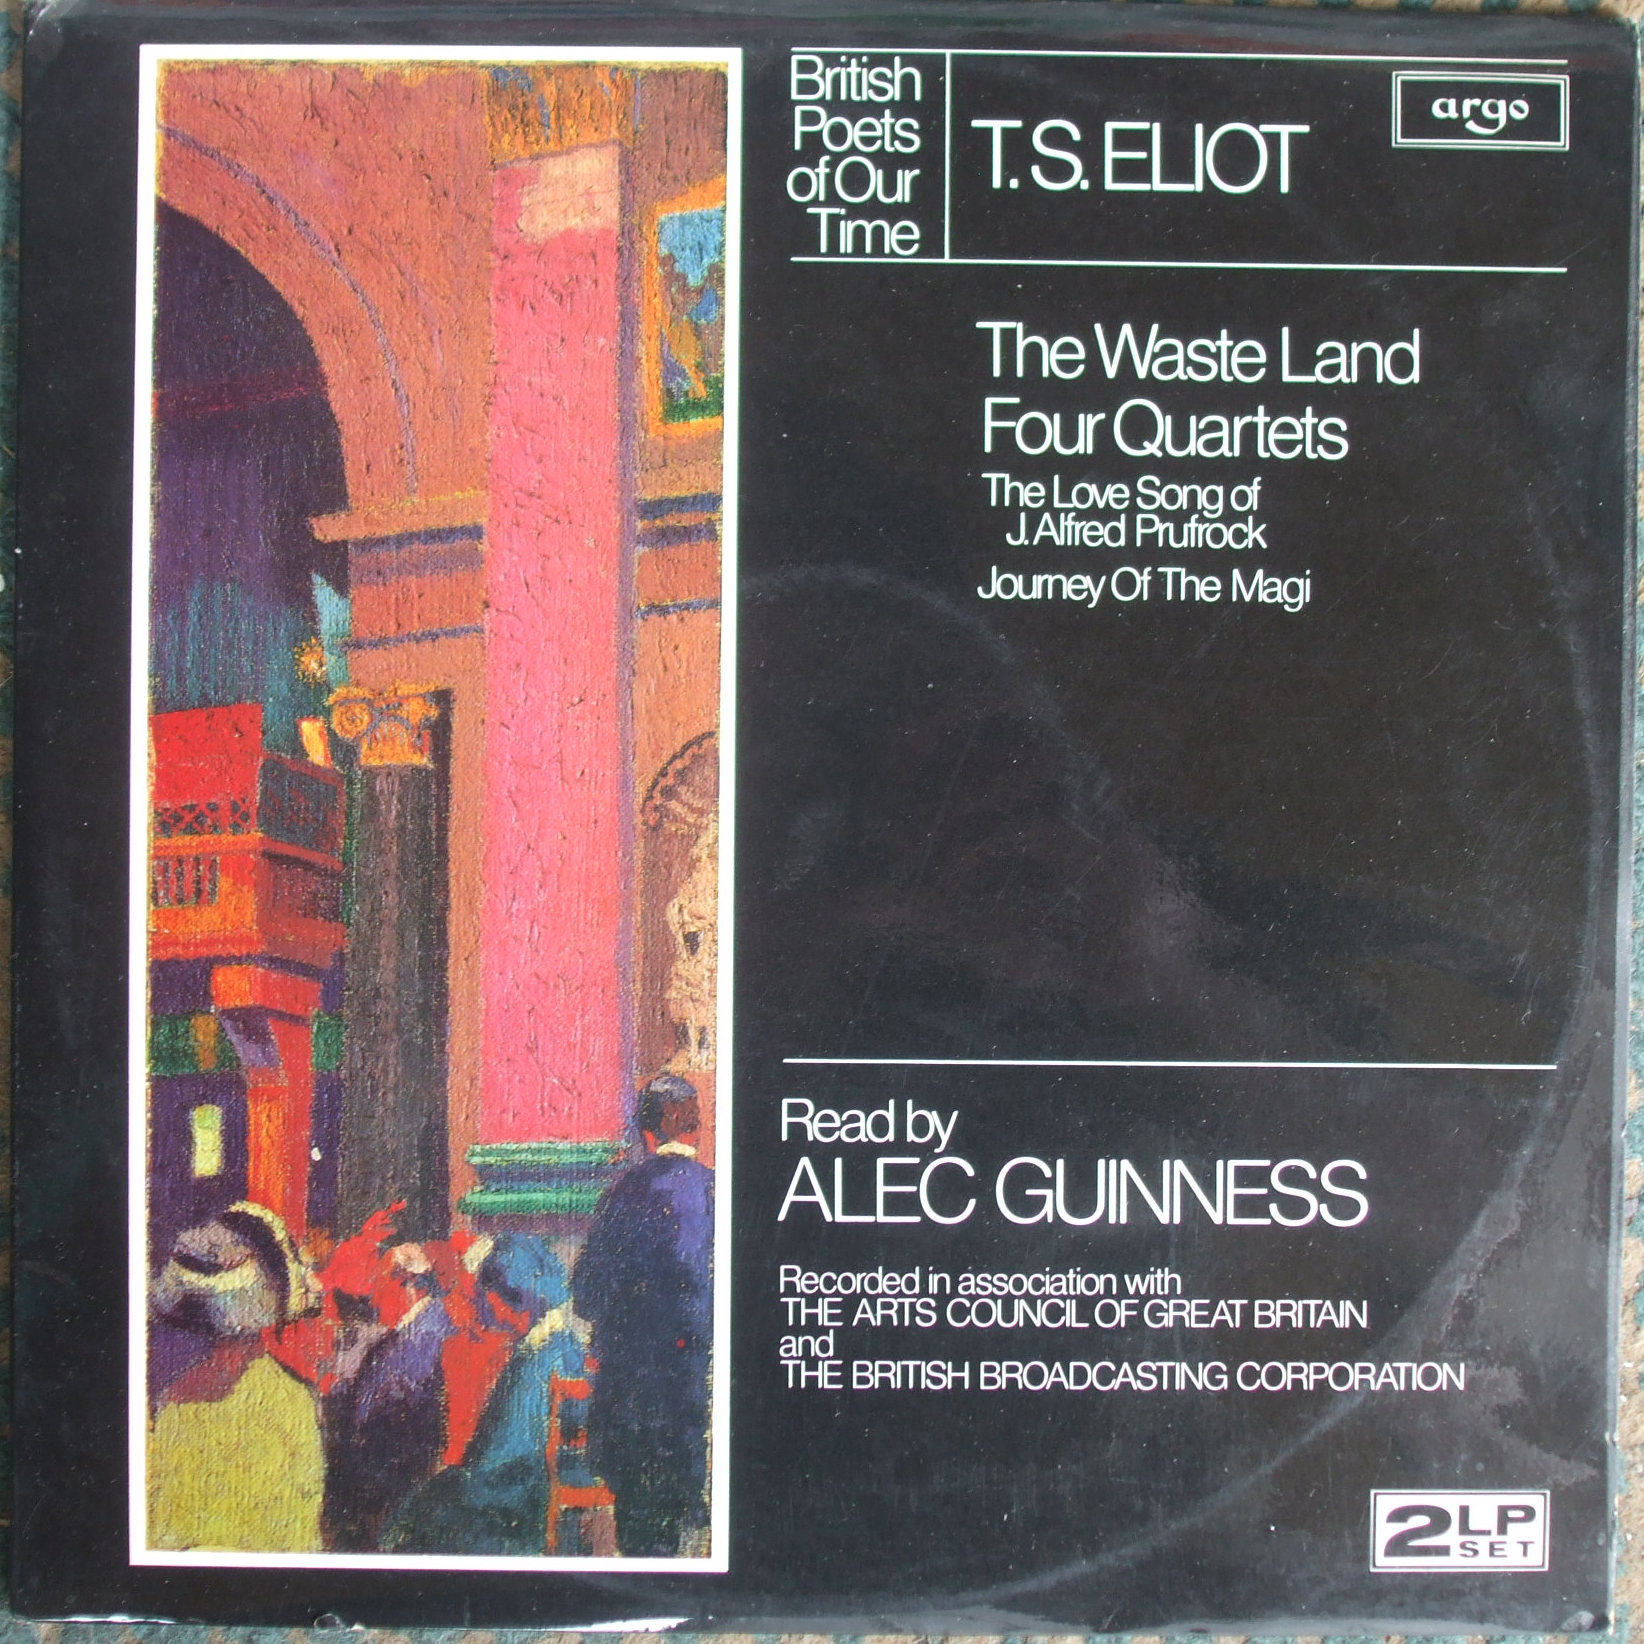 PLP 1206/7 British Poets of Our Time / T.S.Eliot / Read by Alec Guinness